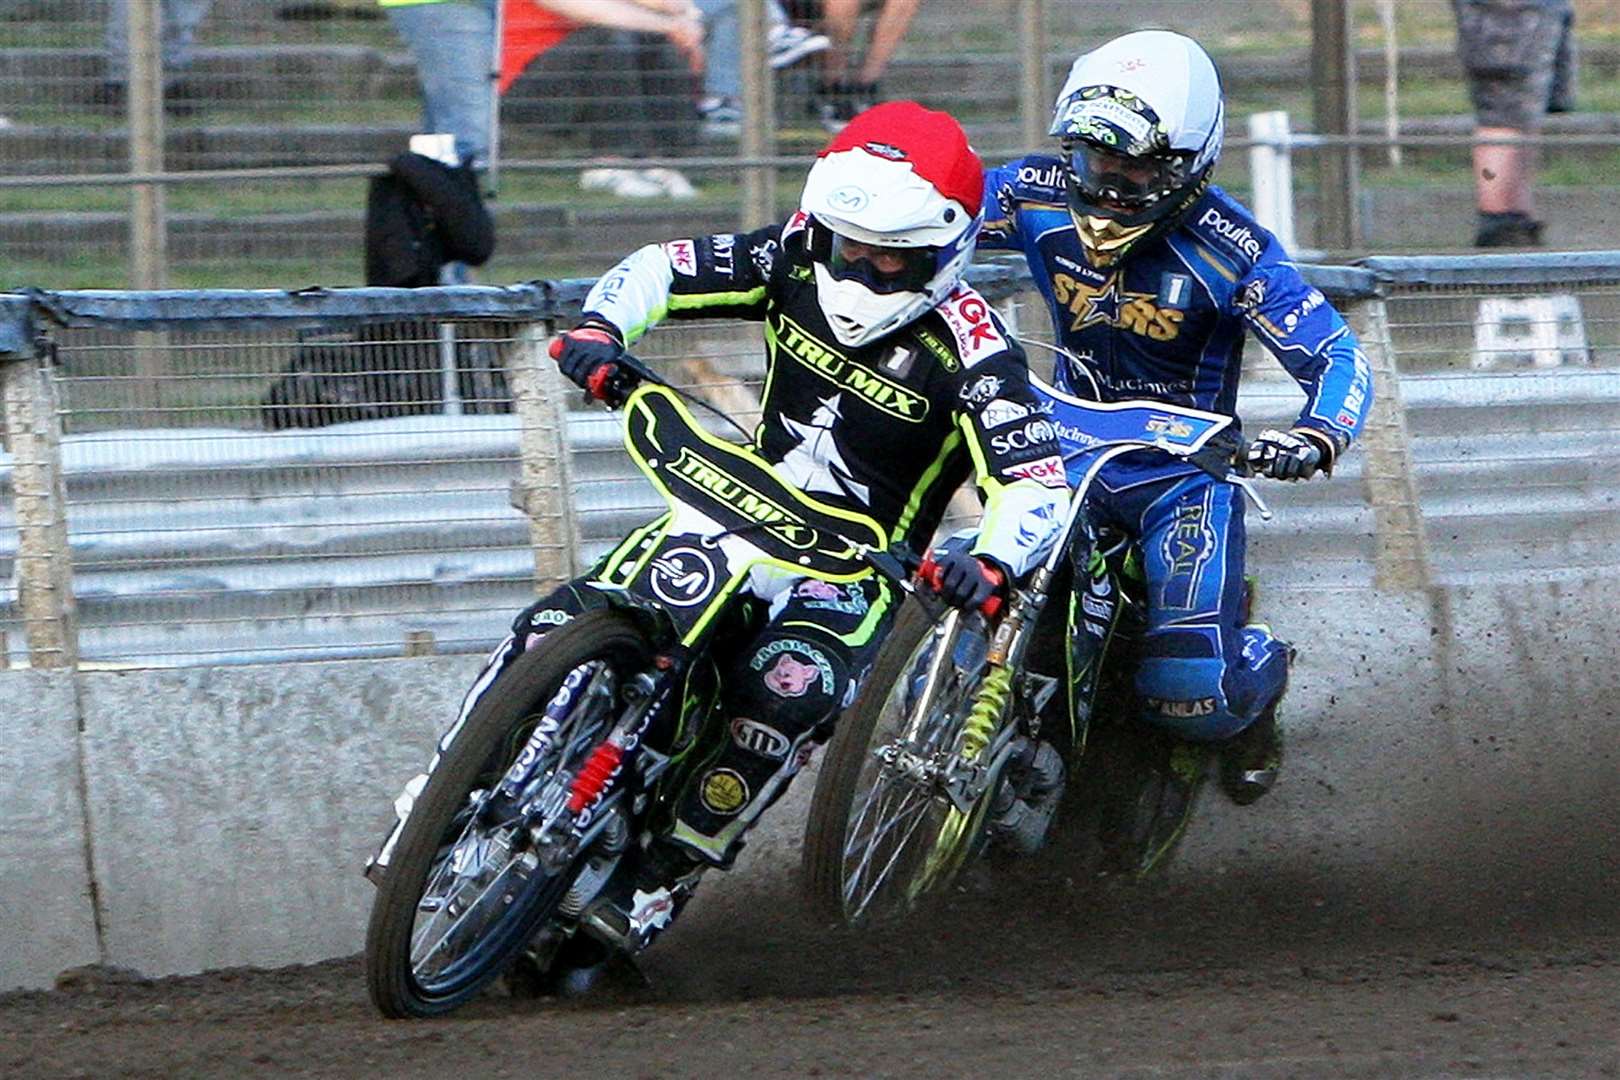 Emil Sayfutdinov broke the track record at Ipswich last week in this race where he leads fellow Russian Artem Laguta in heat one against King’s Lynn last Thursday. Picture: Phil Hilton